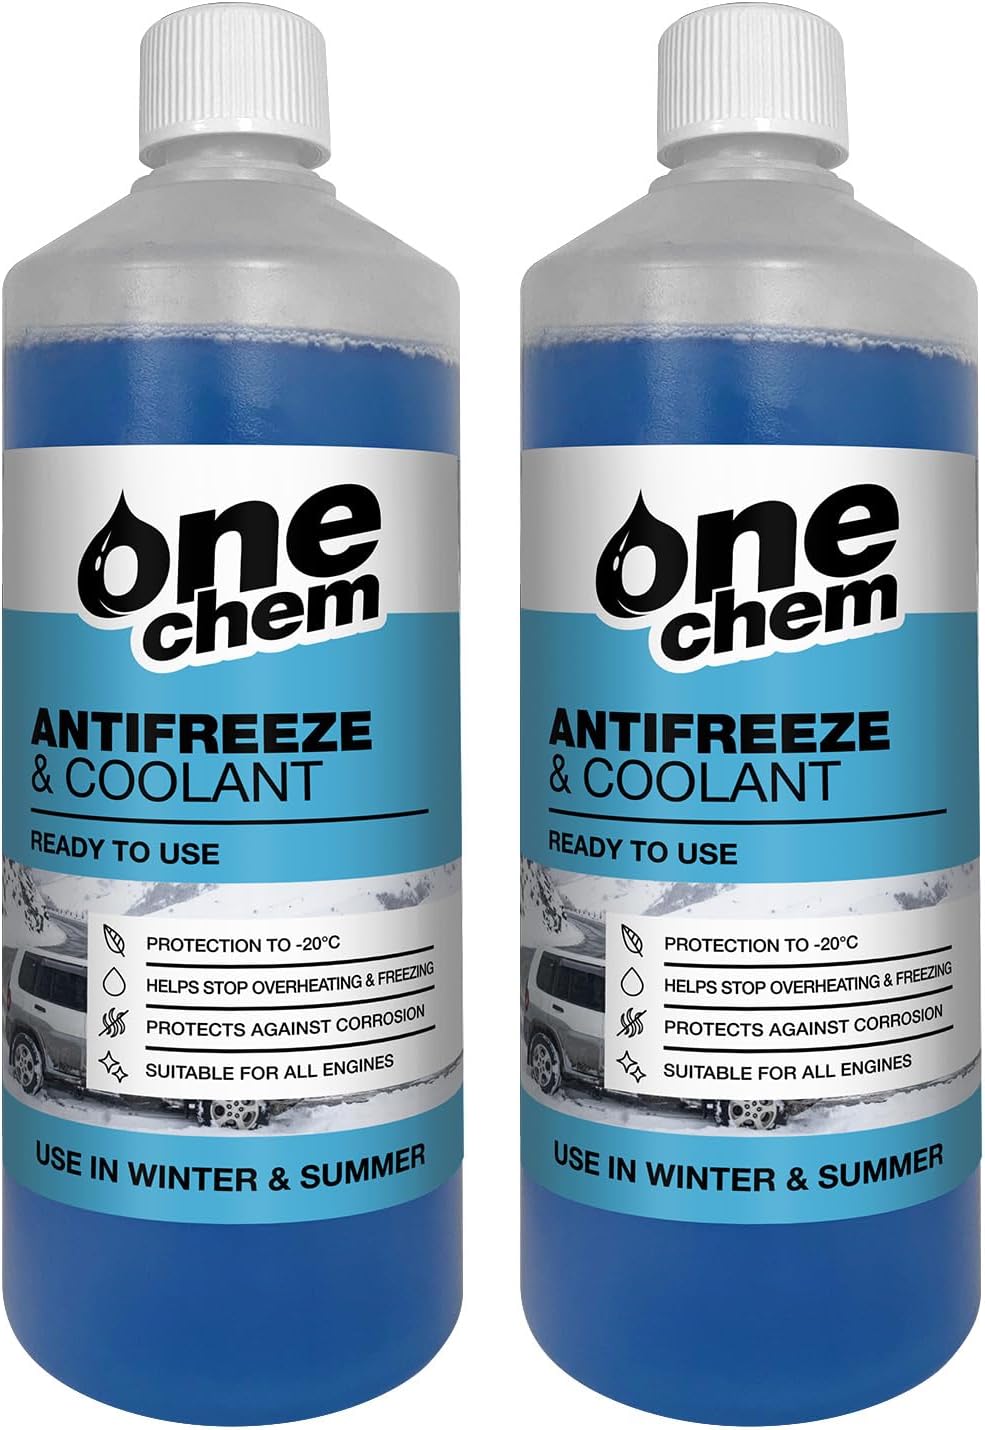 One Chem Antifreeze and Coolant 2 x 1L - Effective down to -20°C